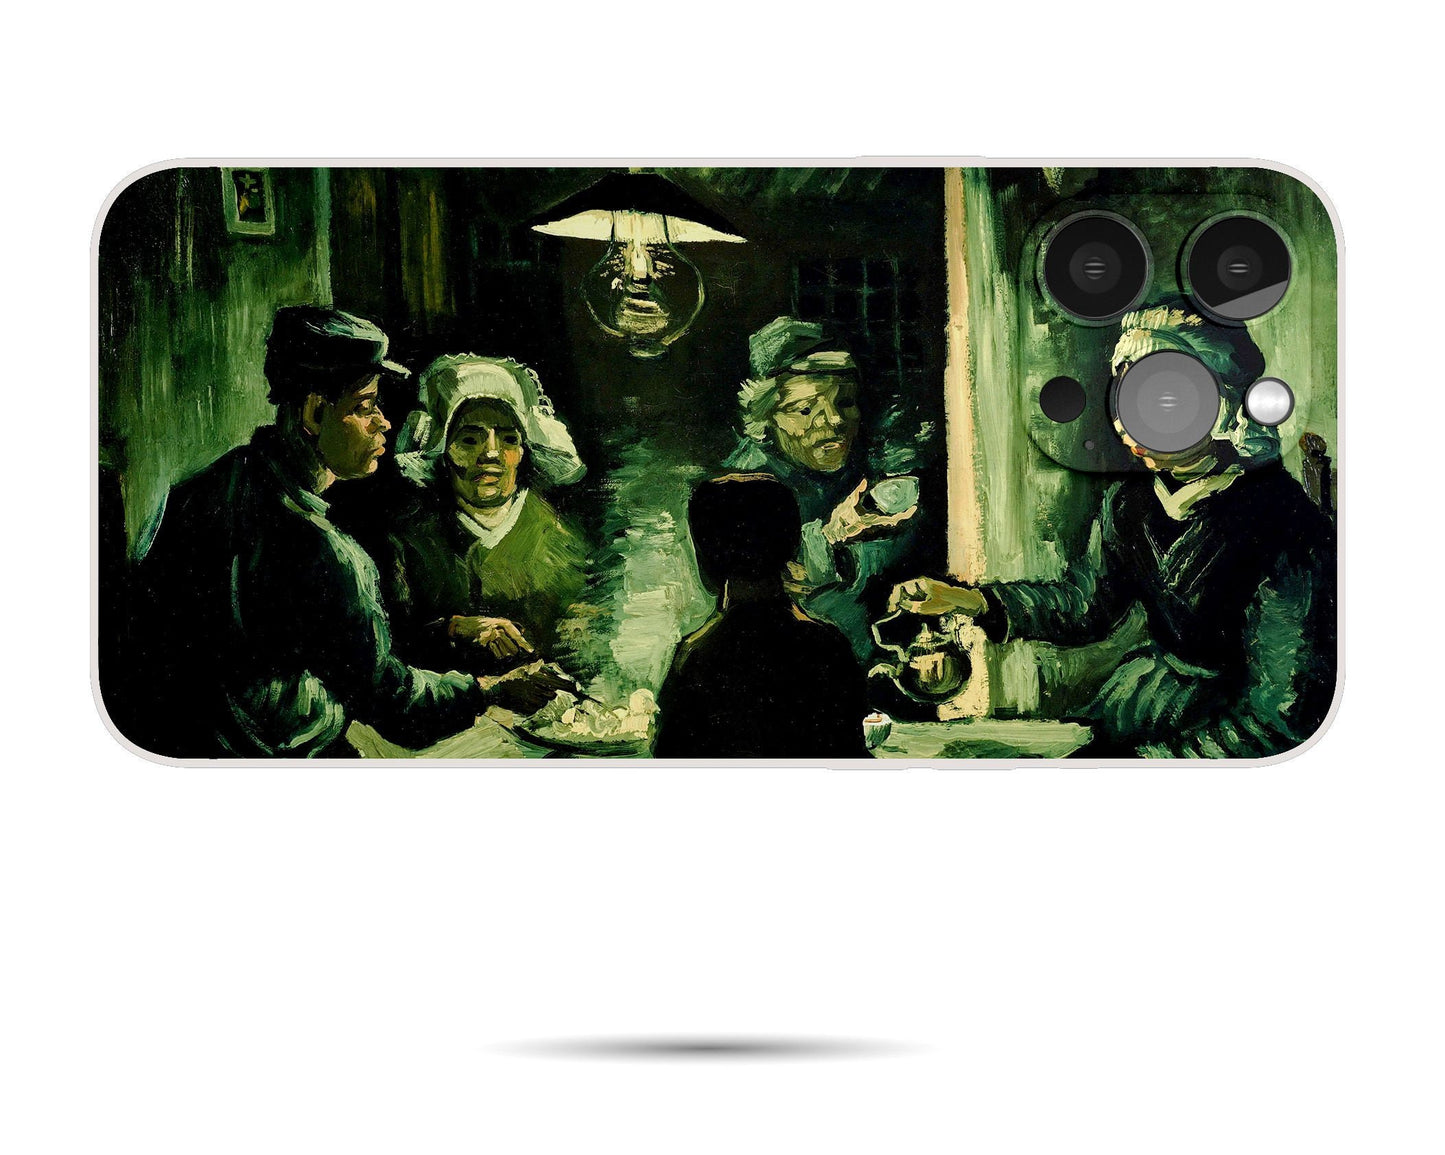 Iphone 14 Case Of Vincent Van Gogh Painting The Potato Eaters, Iphone 8 Case, Iphone Xs Case, Iphone Protective Case, Iphone Case Silicone